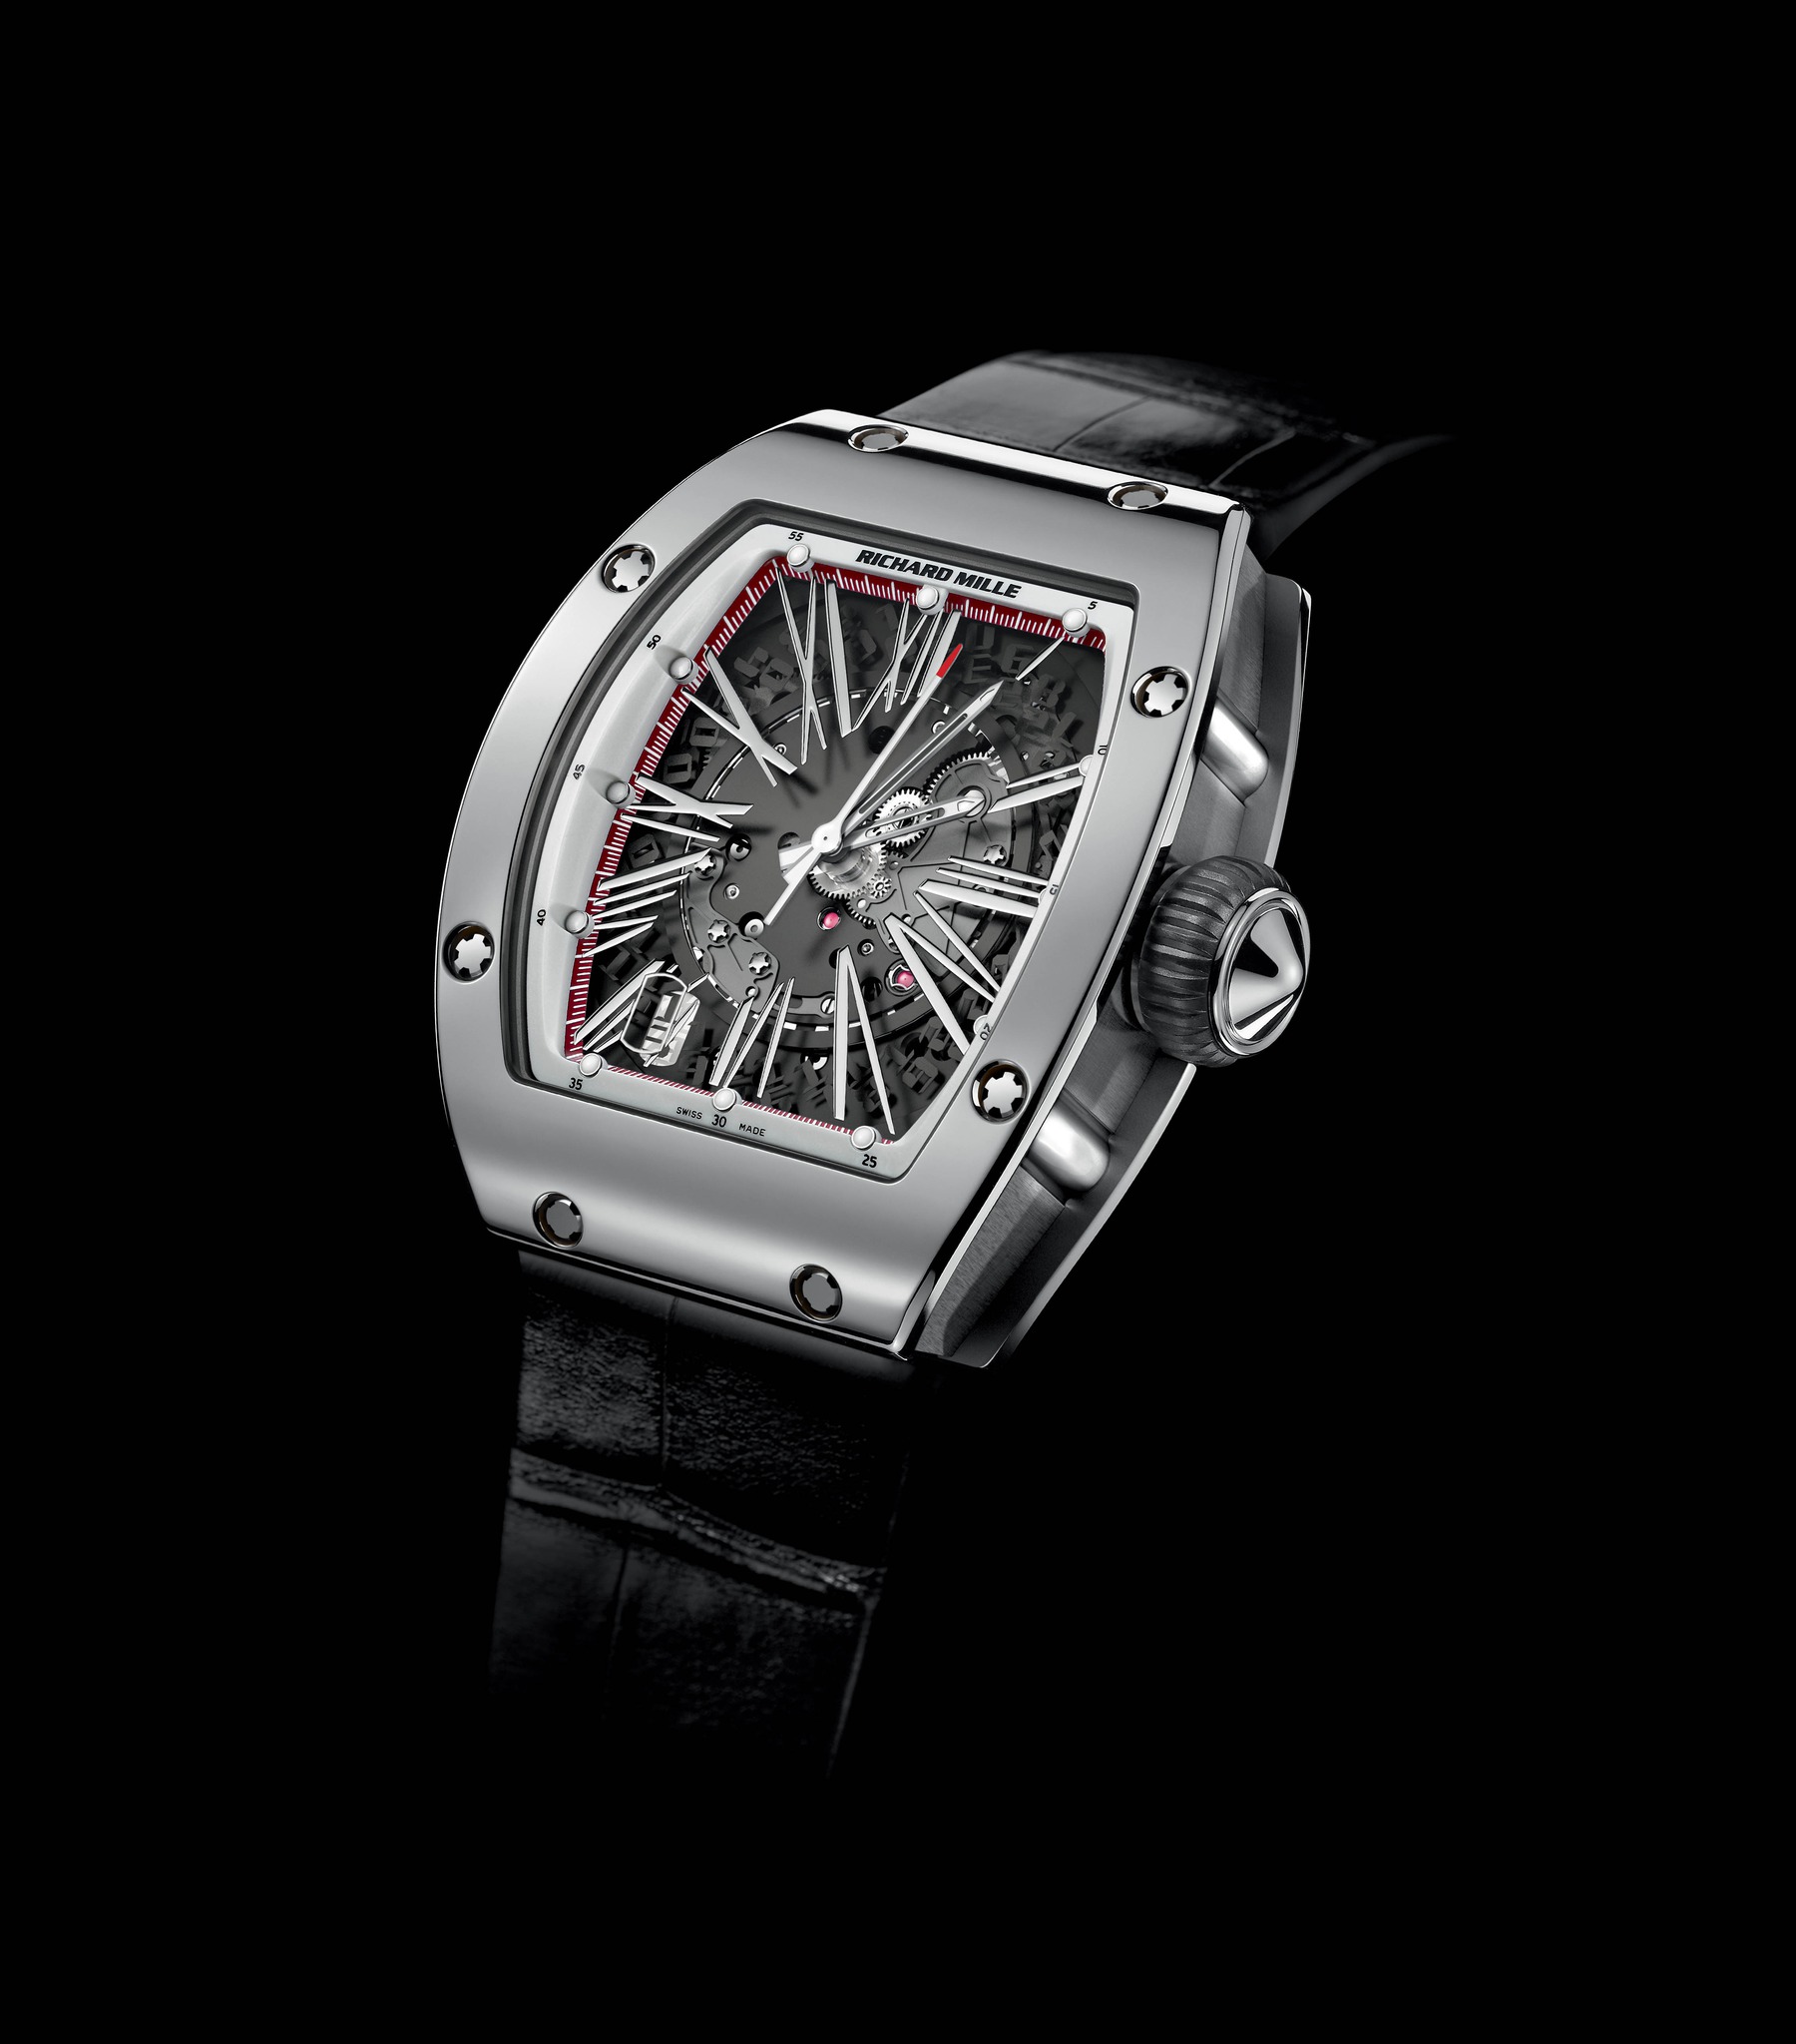 Replica Richard Mille RM 023 Automatic White Gold Watch